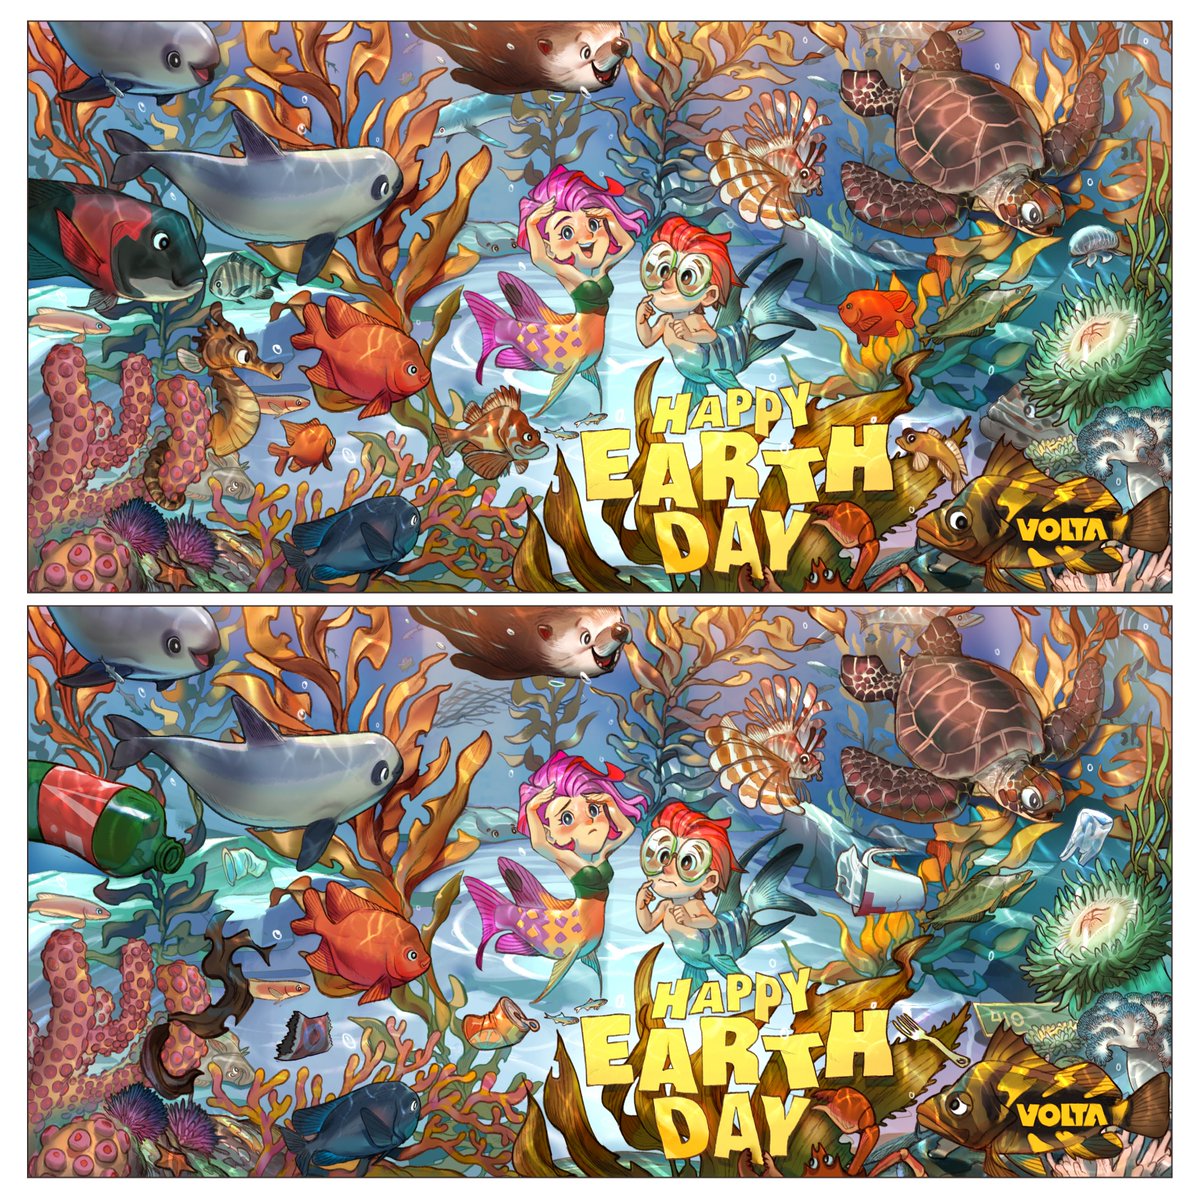 Happy Earth Day, everyone! Help our two merfolks by finding all 10 differences between the two images below created by our artist Sandy! Please take this opportunity to visit earthday.org and learn more about the different initiatives that can help save our planet!